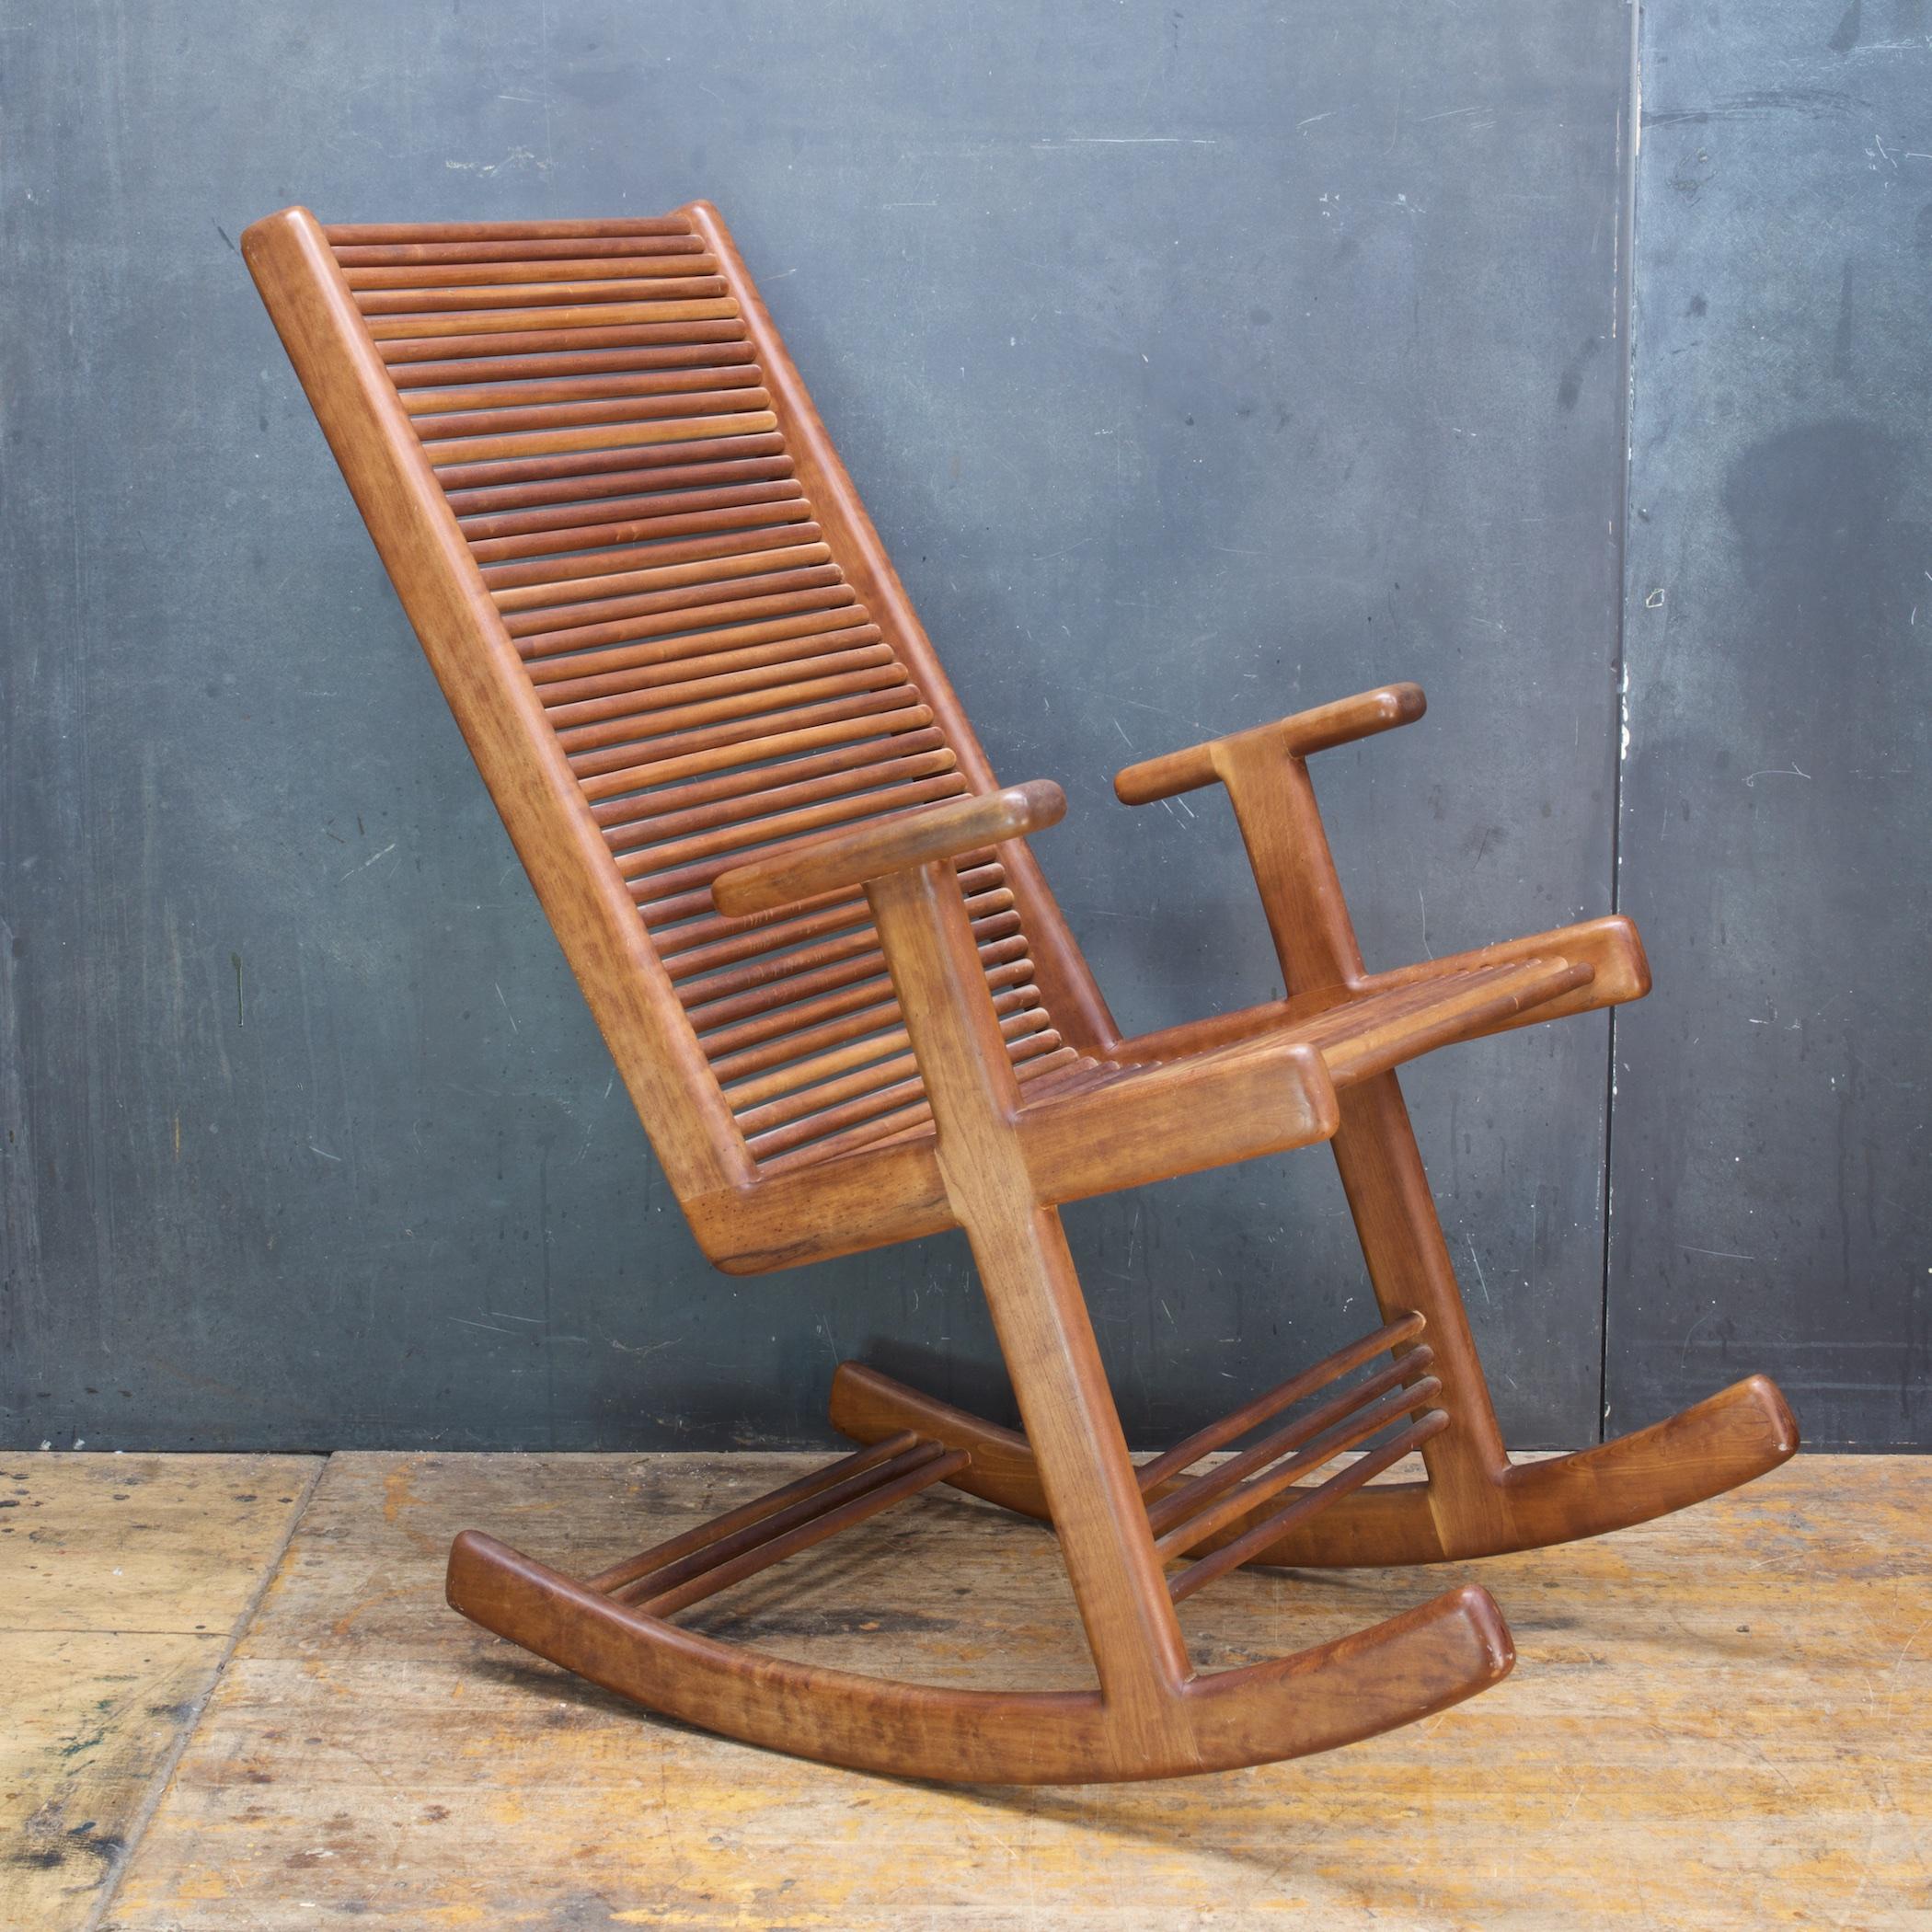 A sculptural and ergonomic dowel rocking chair & ottoman.  An 1980s Studio Craft set designed originally by Doug Lambrecht and Jerry Mandell.  A few years later Artist Stephen Hynson worked with a former employee of Lambrecht and Mandell to produced